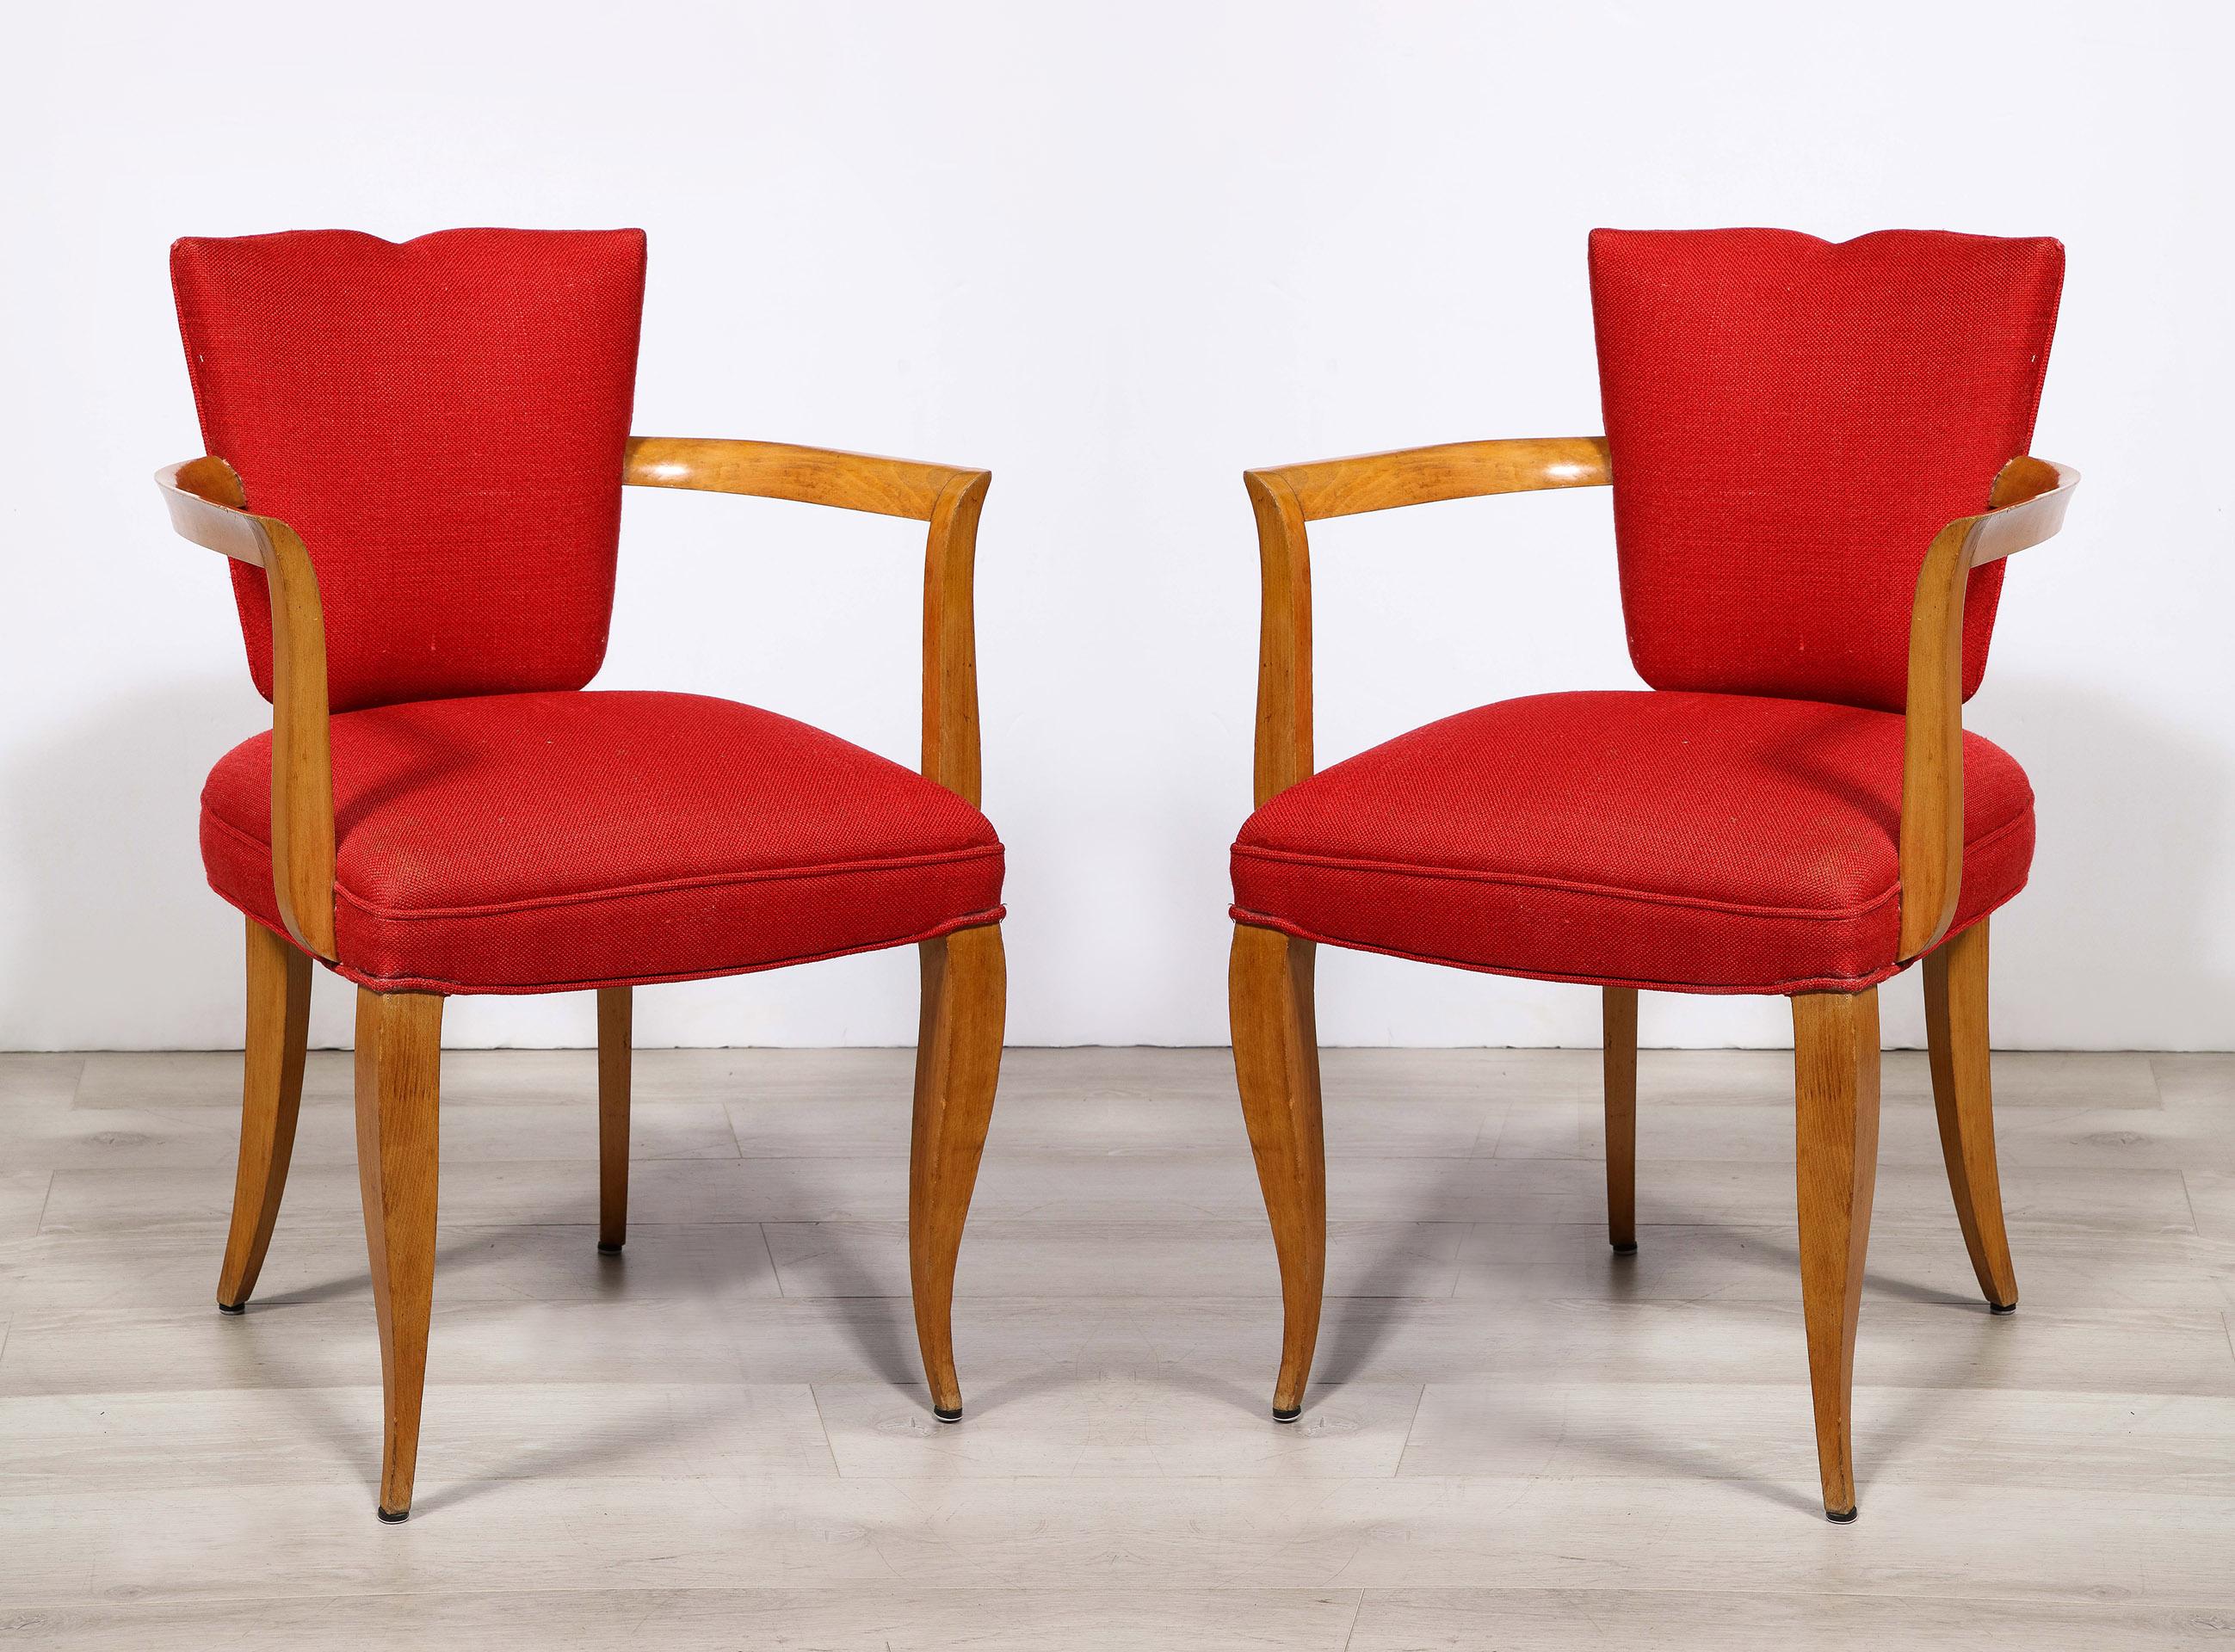 The Sycamore Arm Chairs having an upholstered back and seat, with out swept arms on cabriole legs.